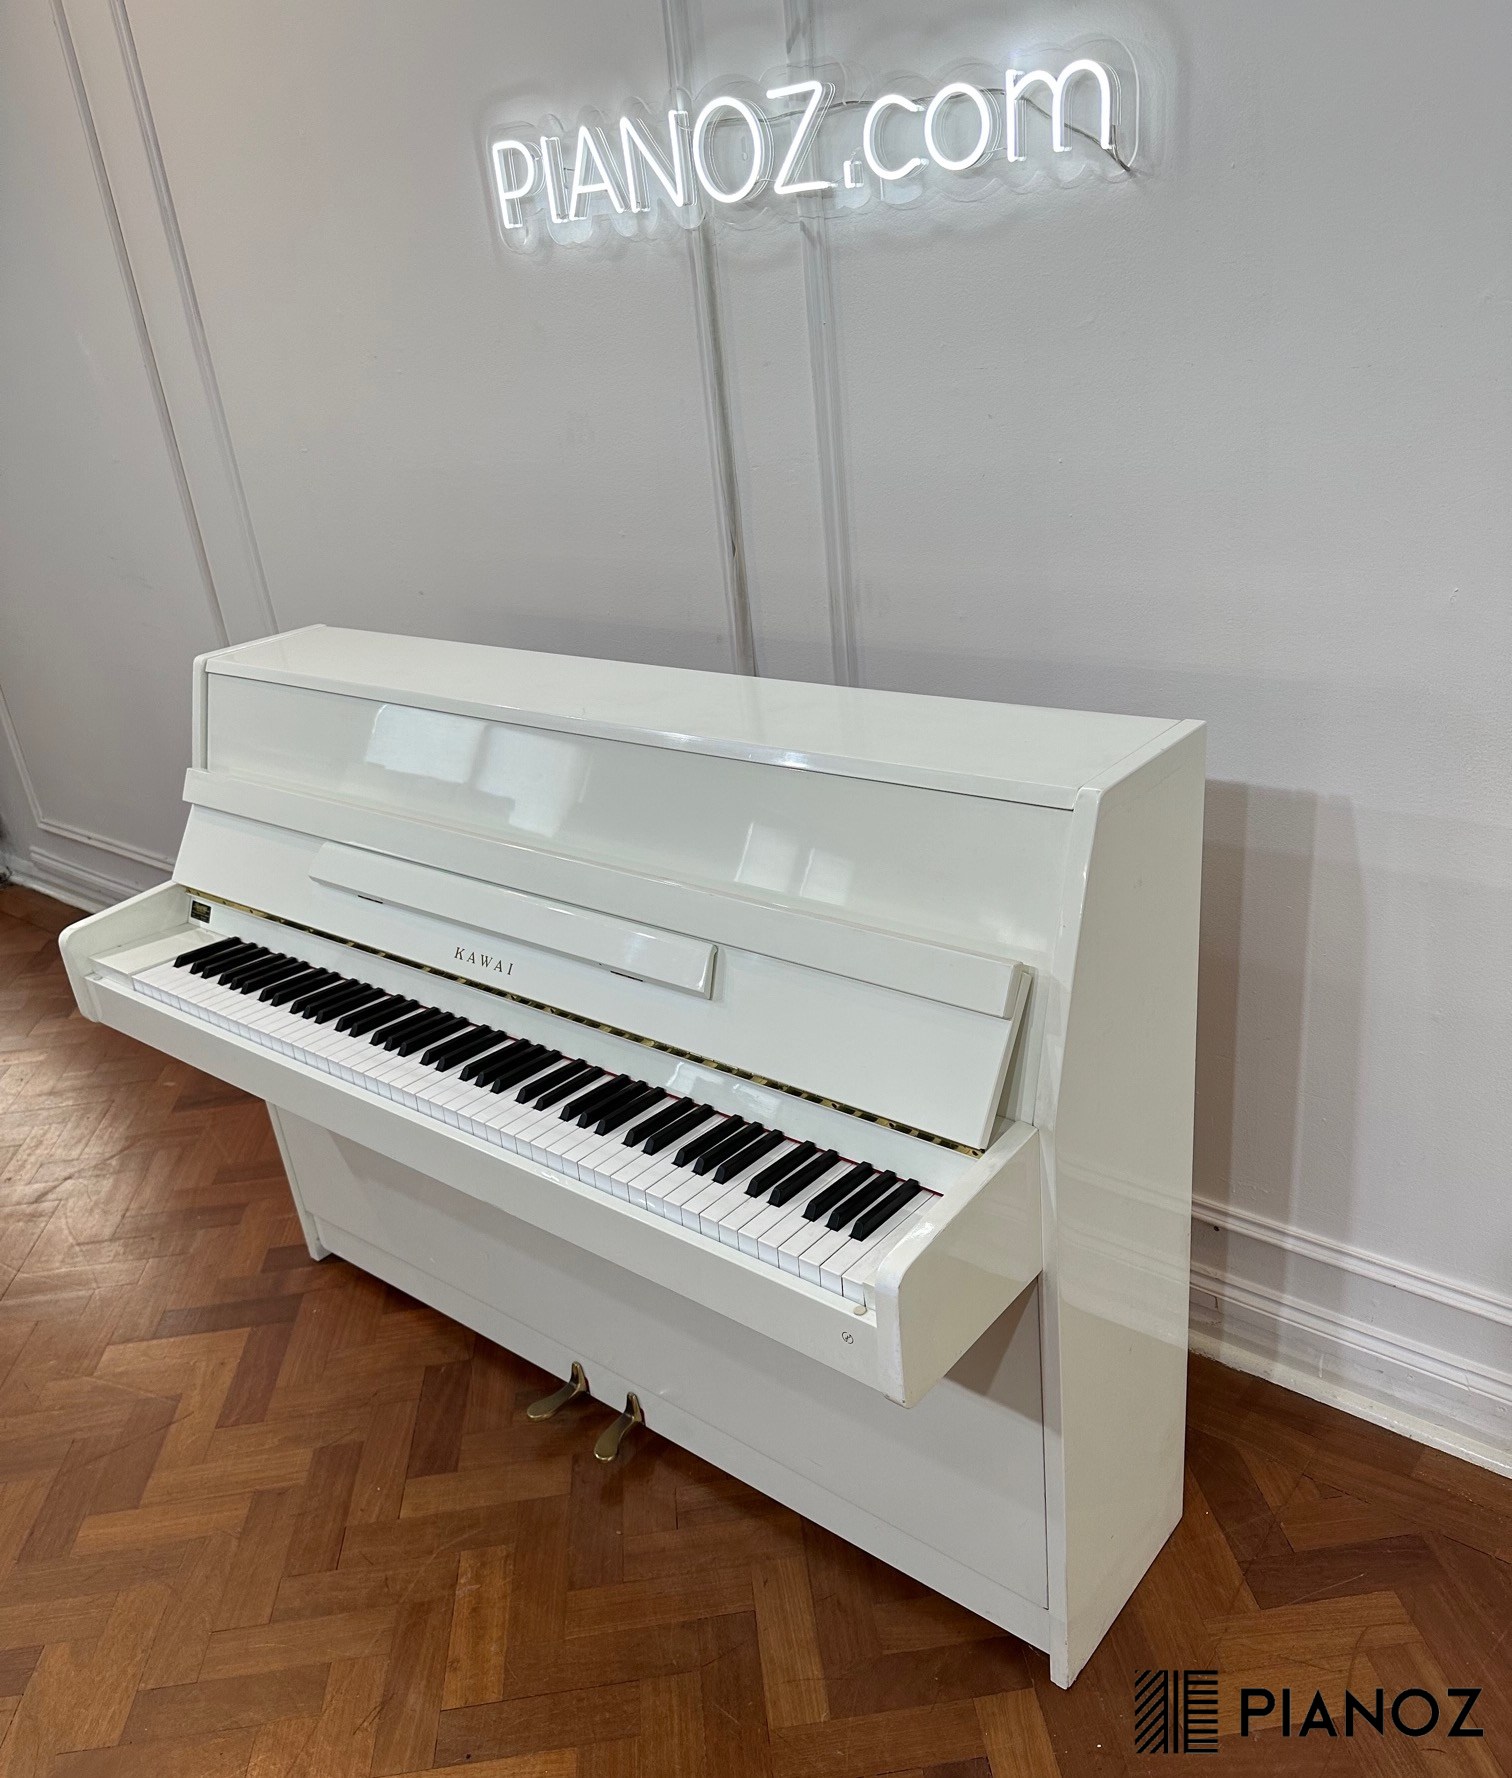 Kawai Japanese White Upright Piano piano for sale in UK